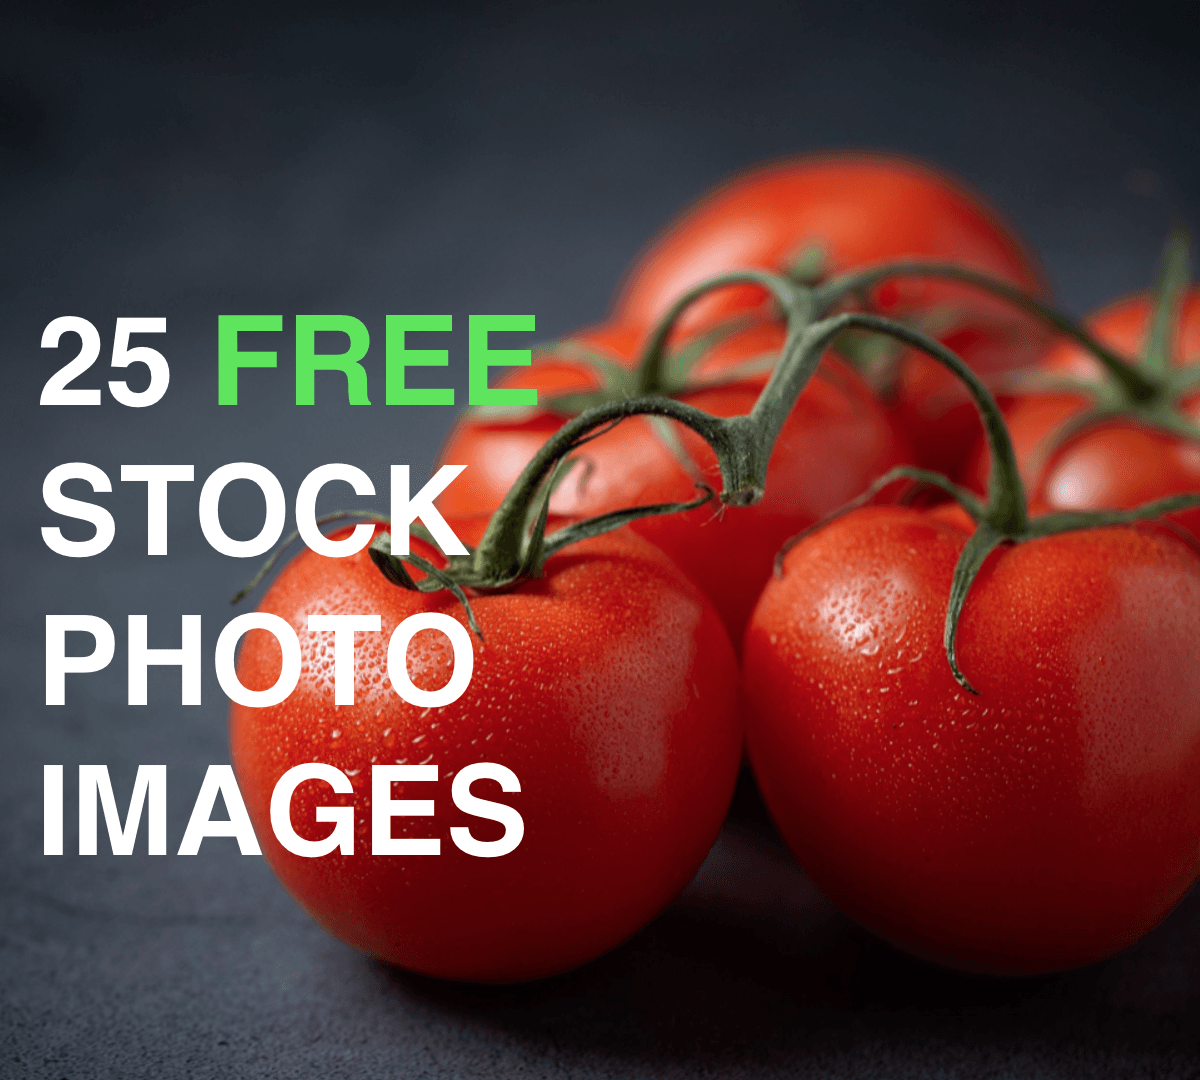 text placed over a stock image of tomatoes to show before and after effect of stock images